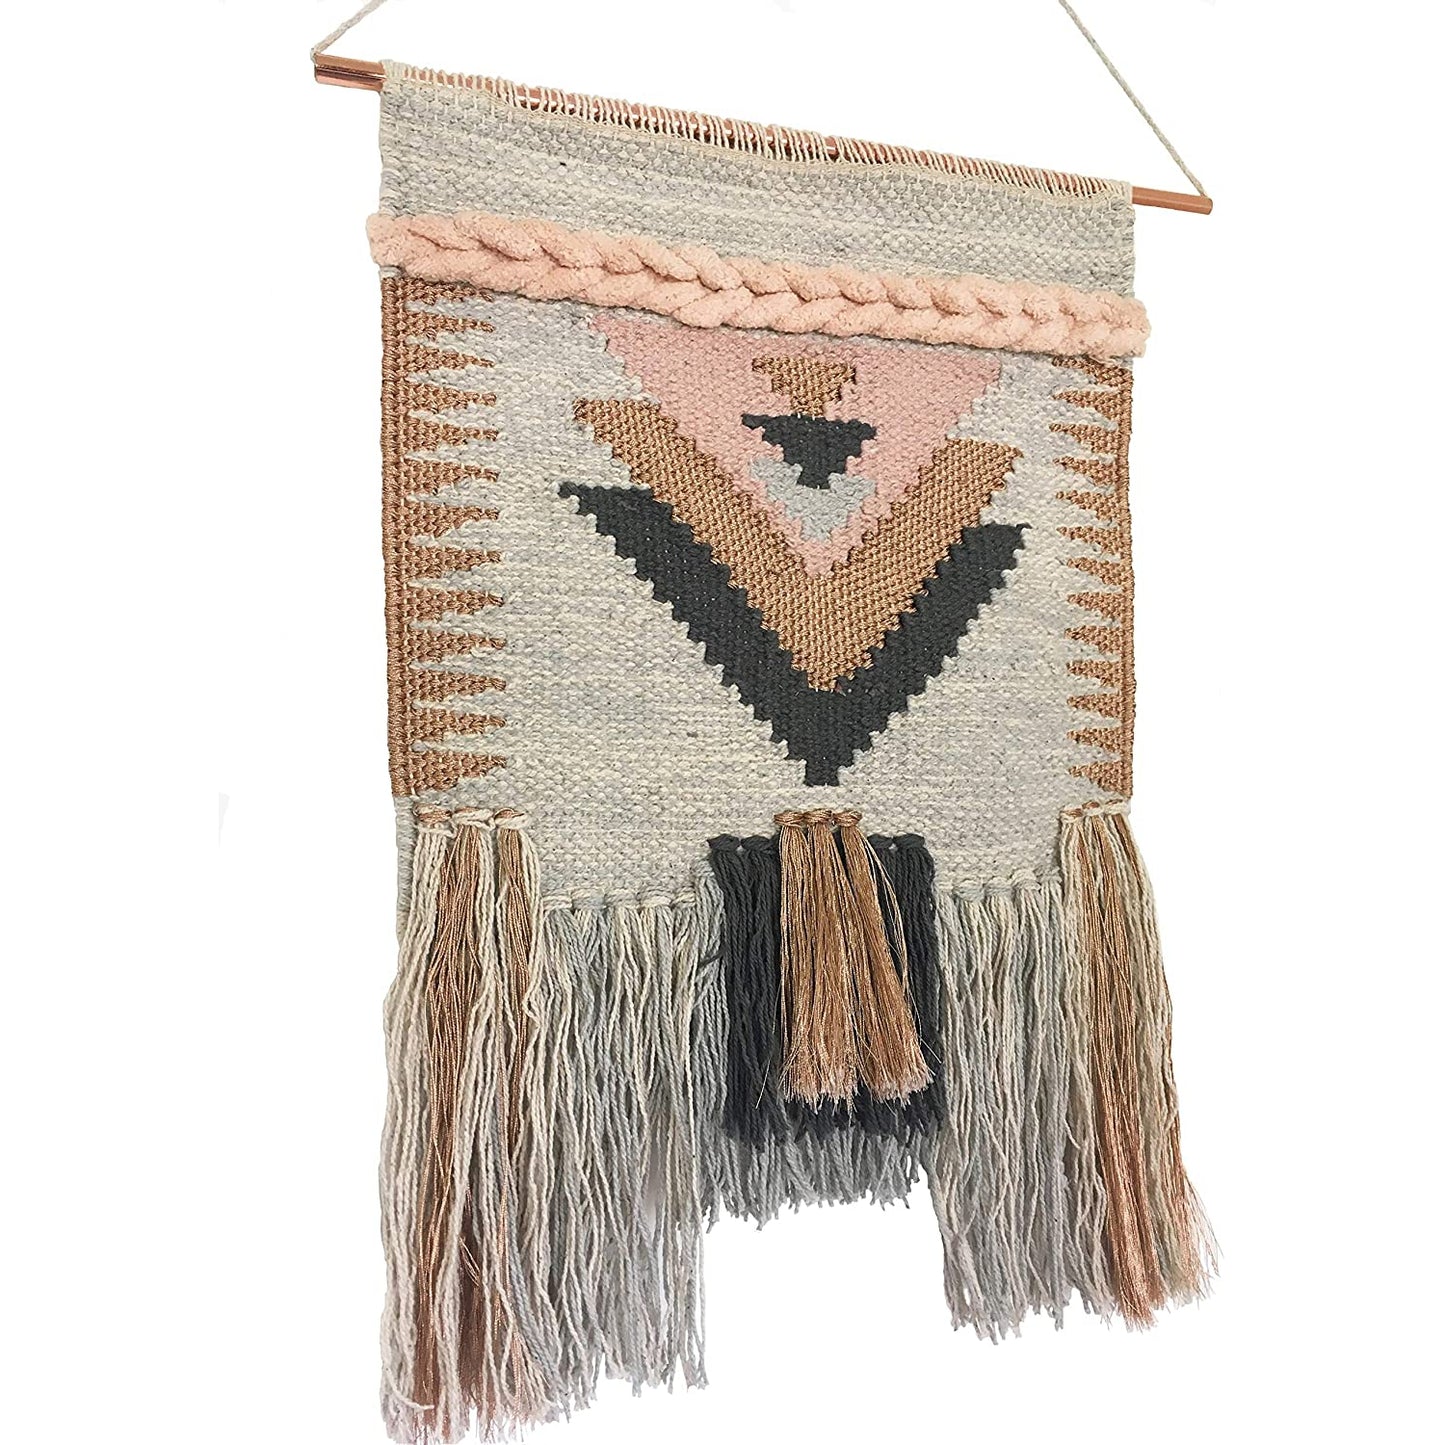 Allure Hand-Woven Wall Hanging Decor | Bohemian Inspired